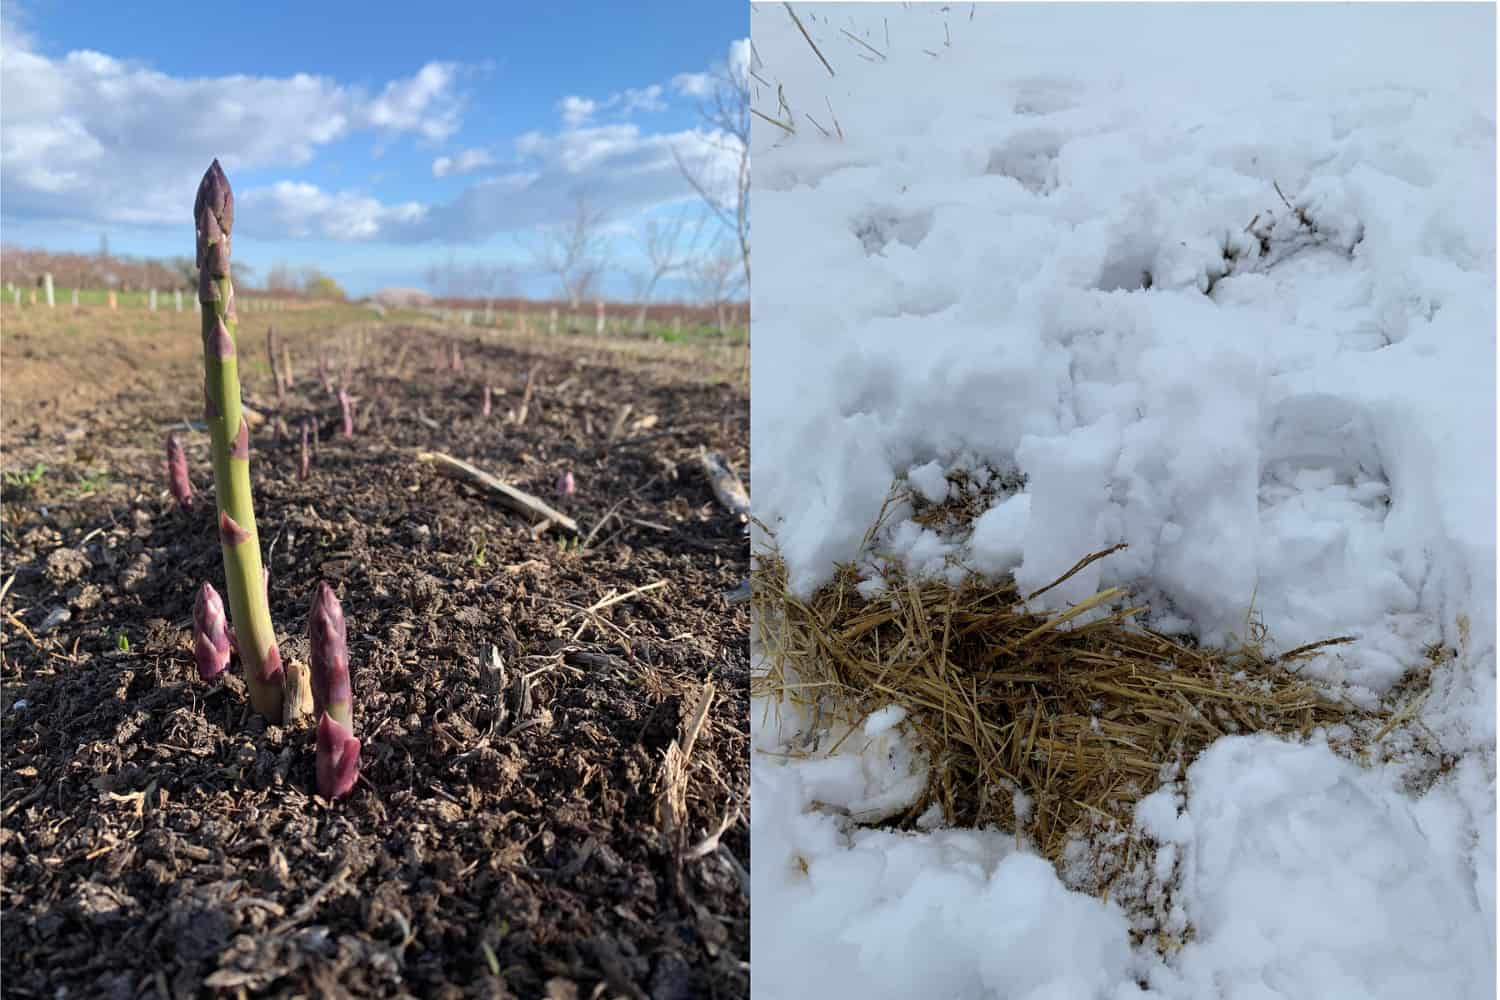 Left picture shows a few short asparagus stalks sticking out of the earth and on sparcely clouded day. Right picture shows a few centimetres of snow on top of thick layers of straw on the ground